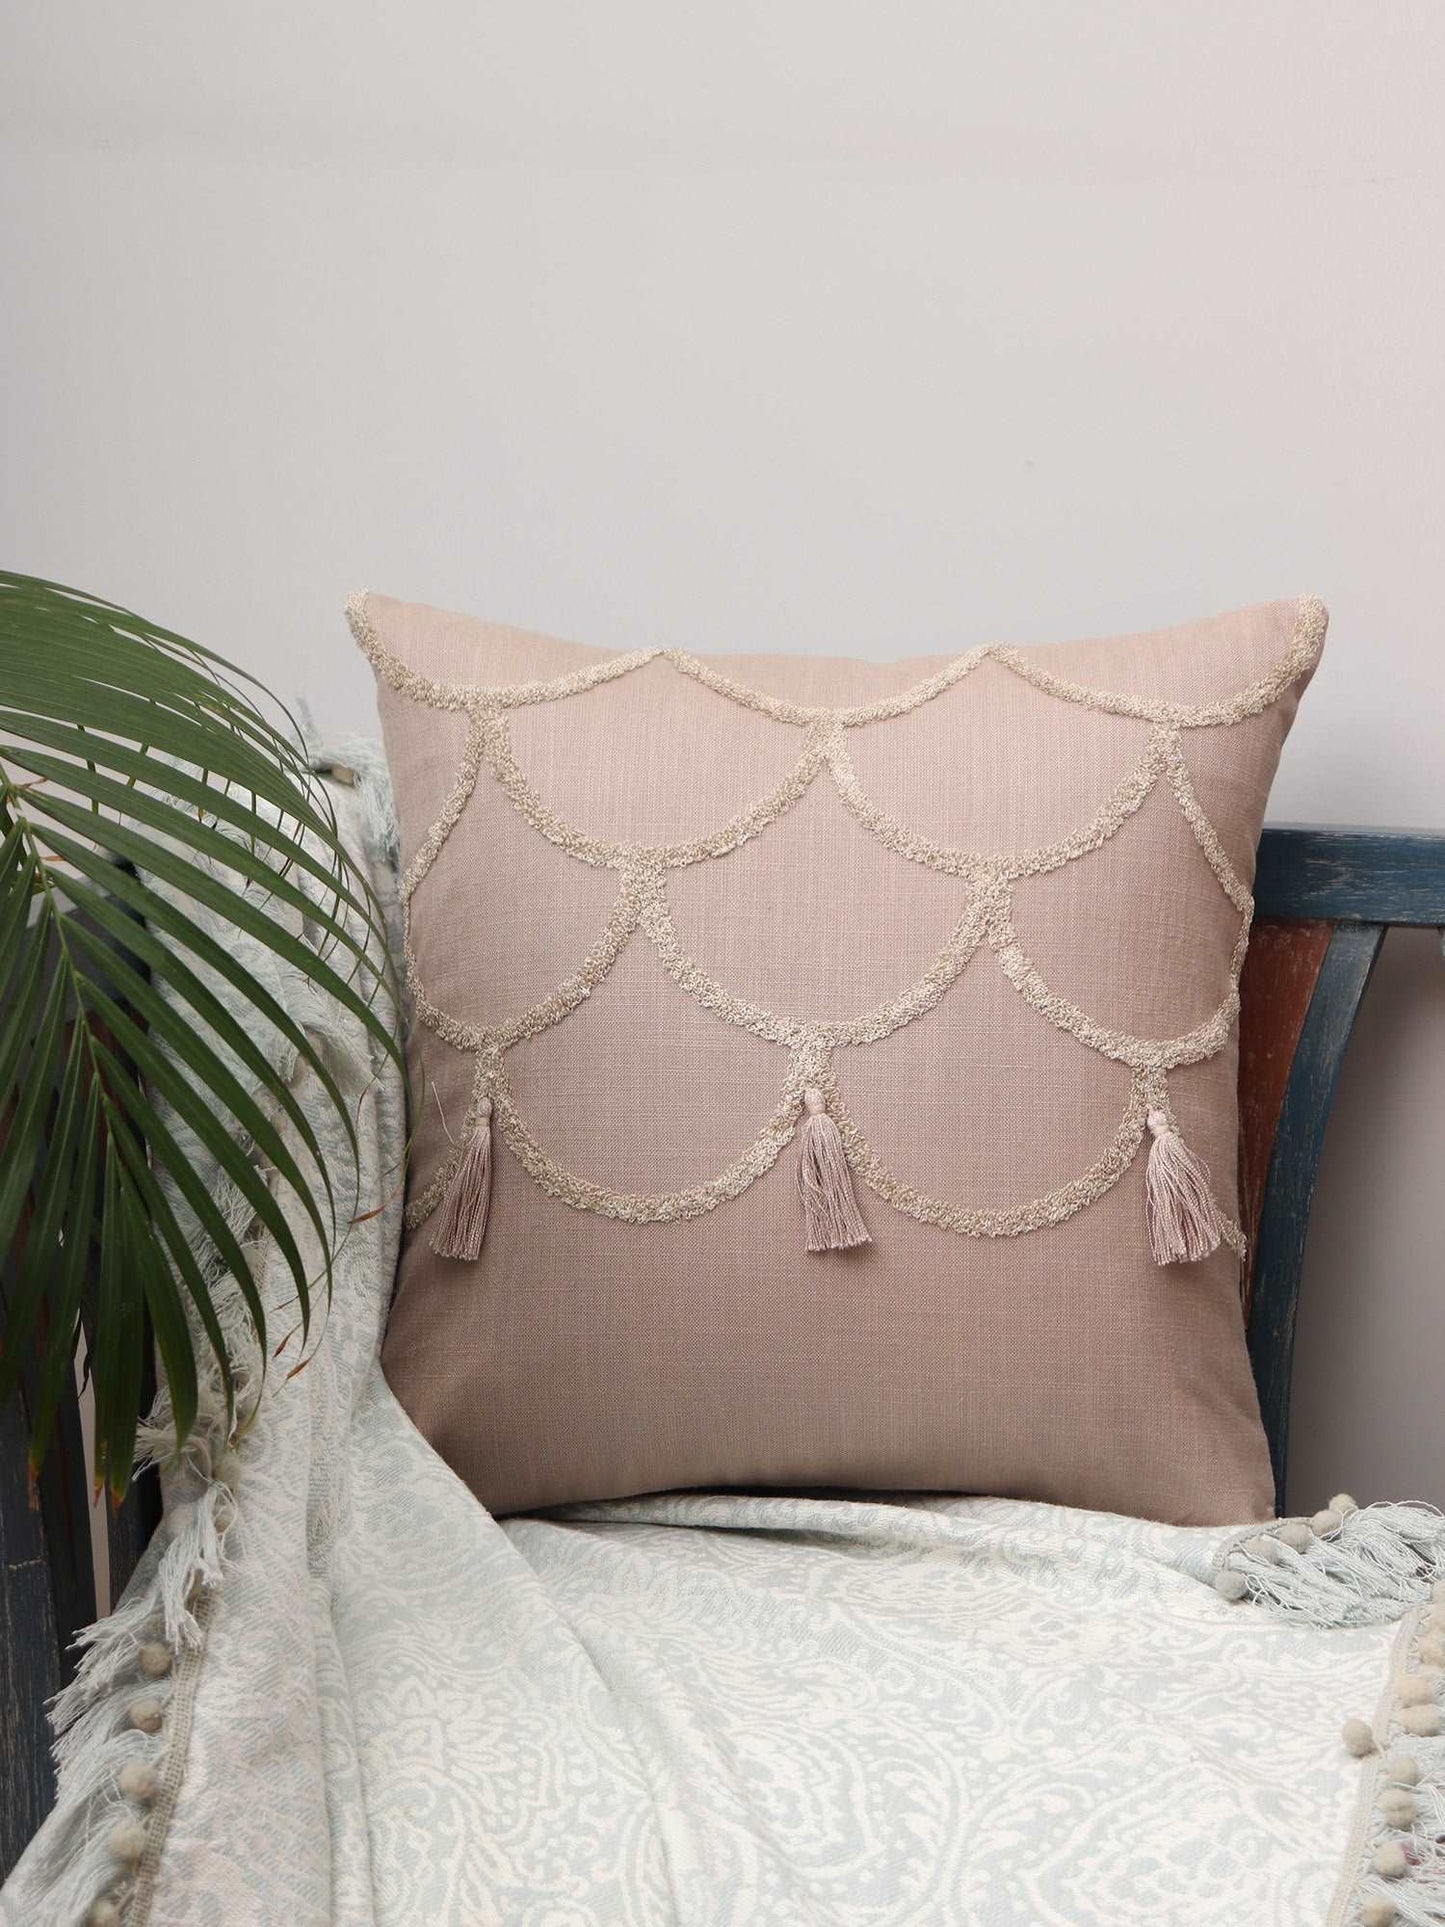 Cushion Cover Cotton Blend Aari and Towel Textured Embroidery with Tassels Beige - 16inches X 16inches